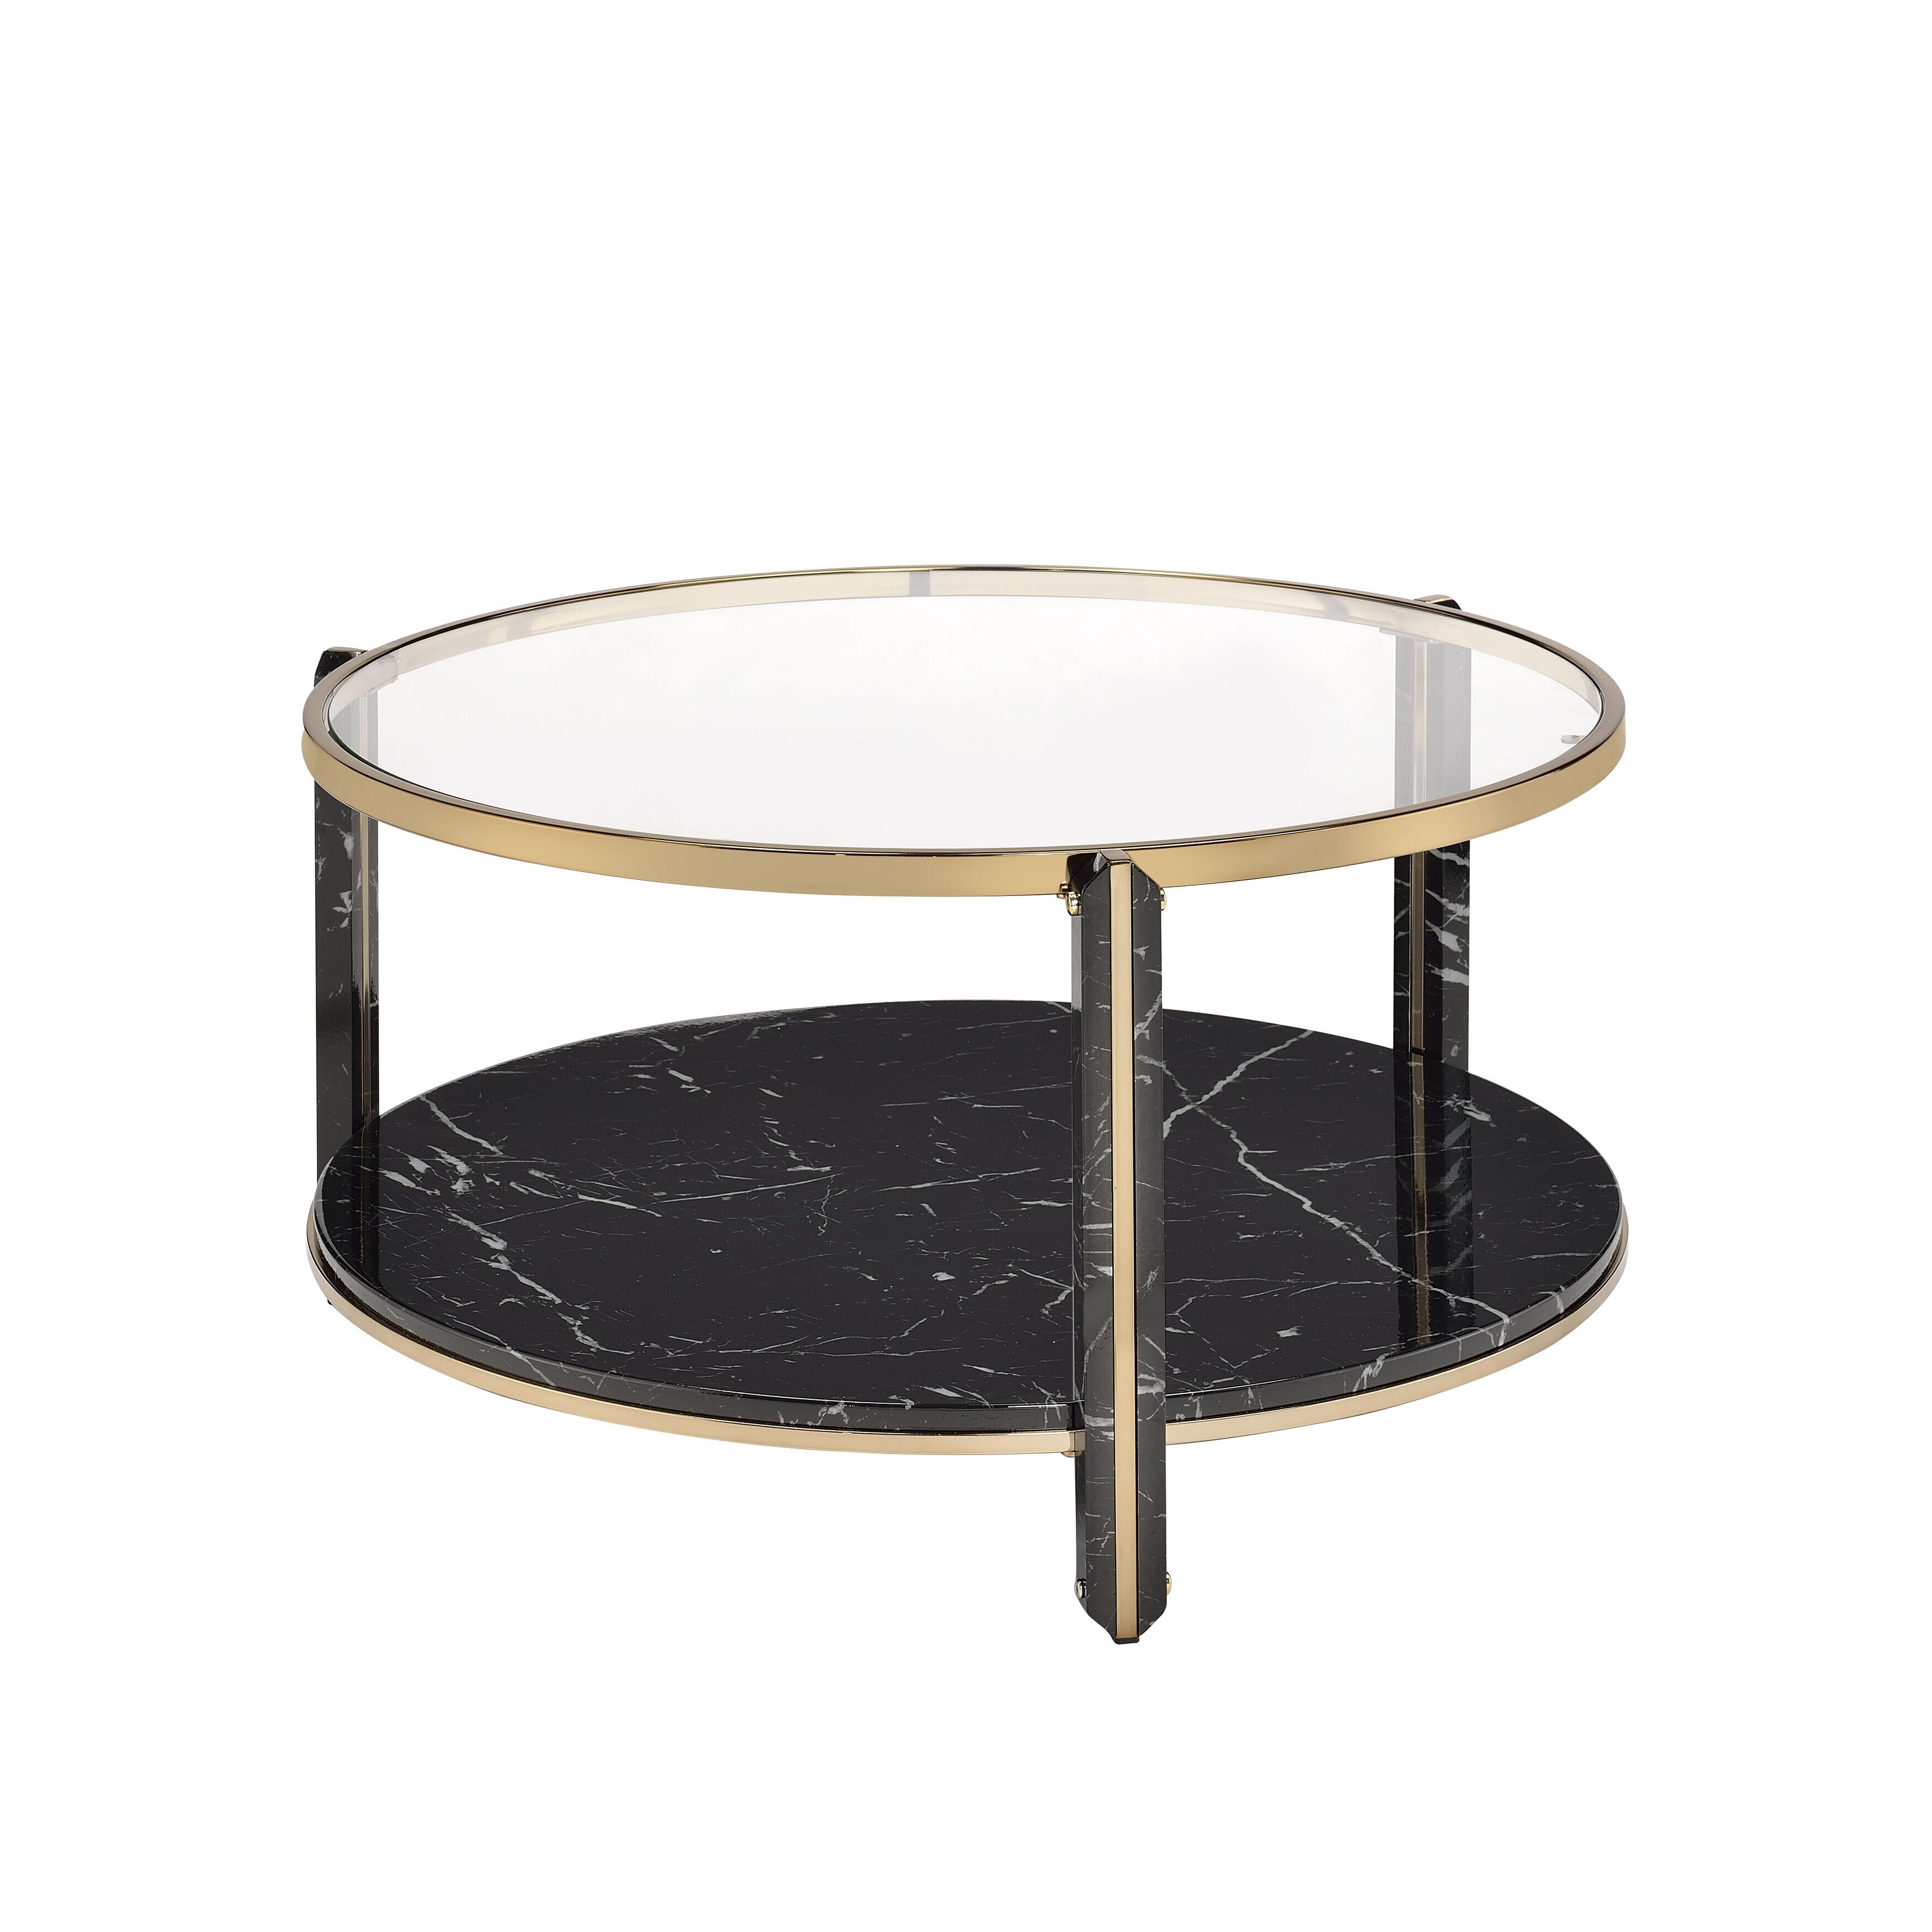 A glass and black marble coffee table